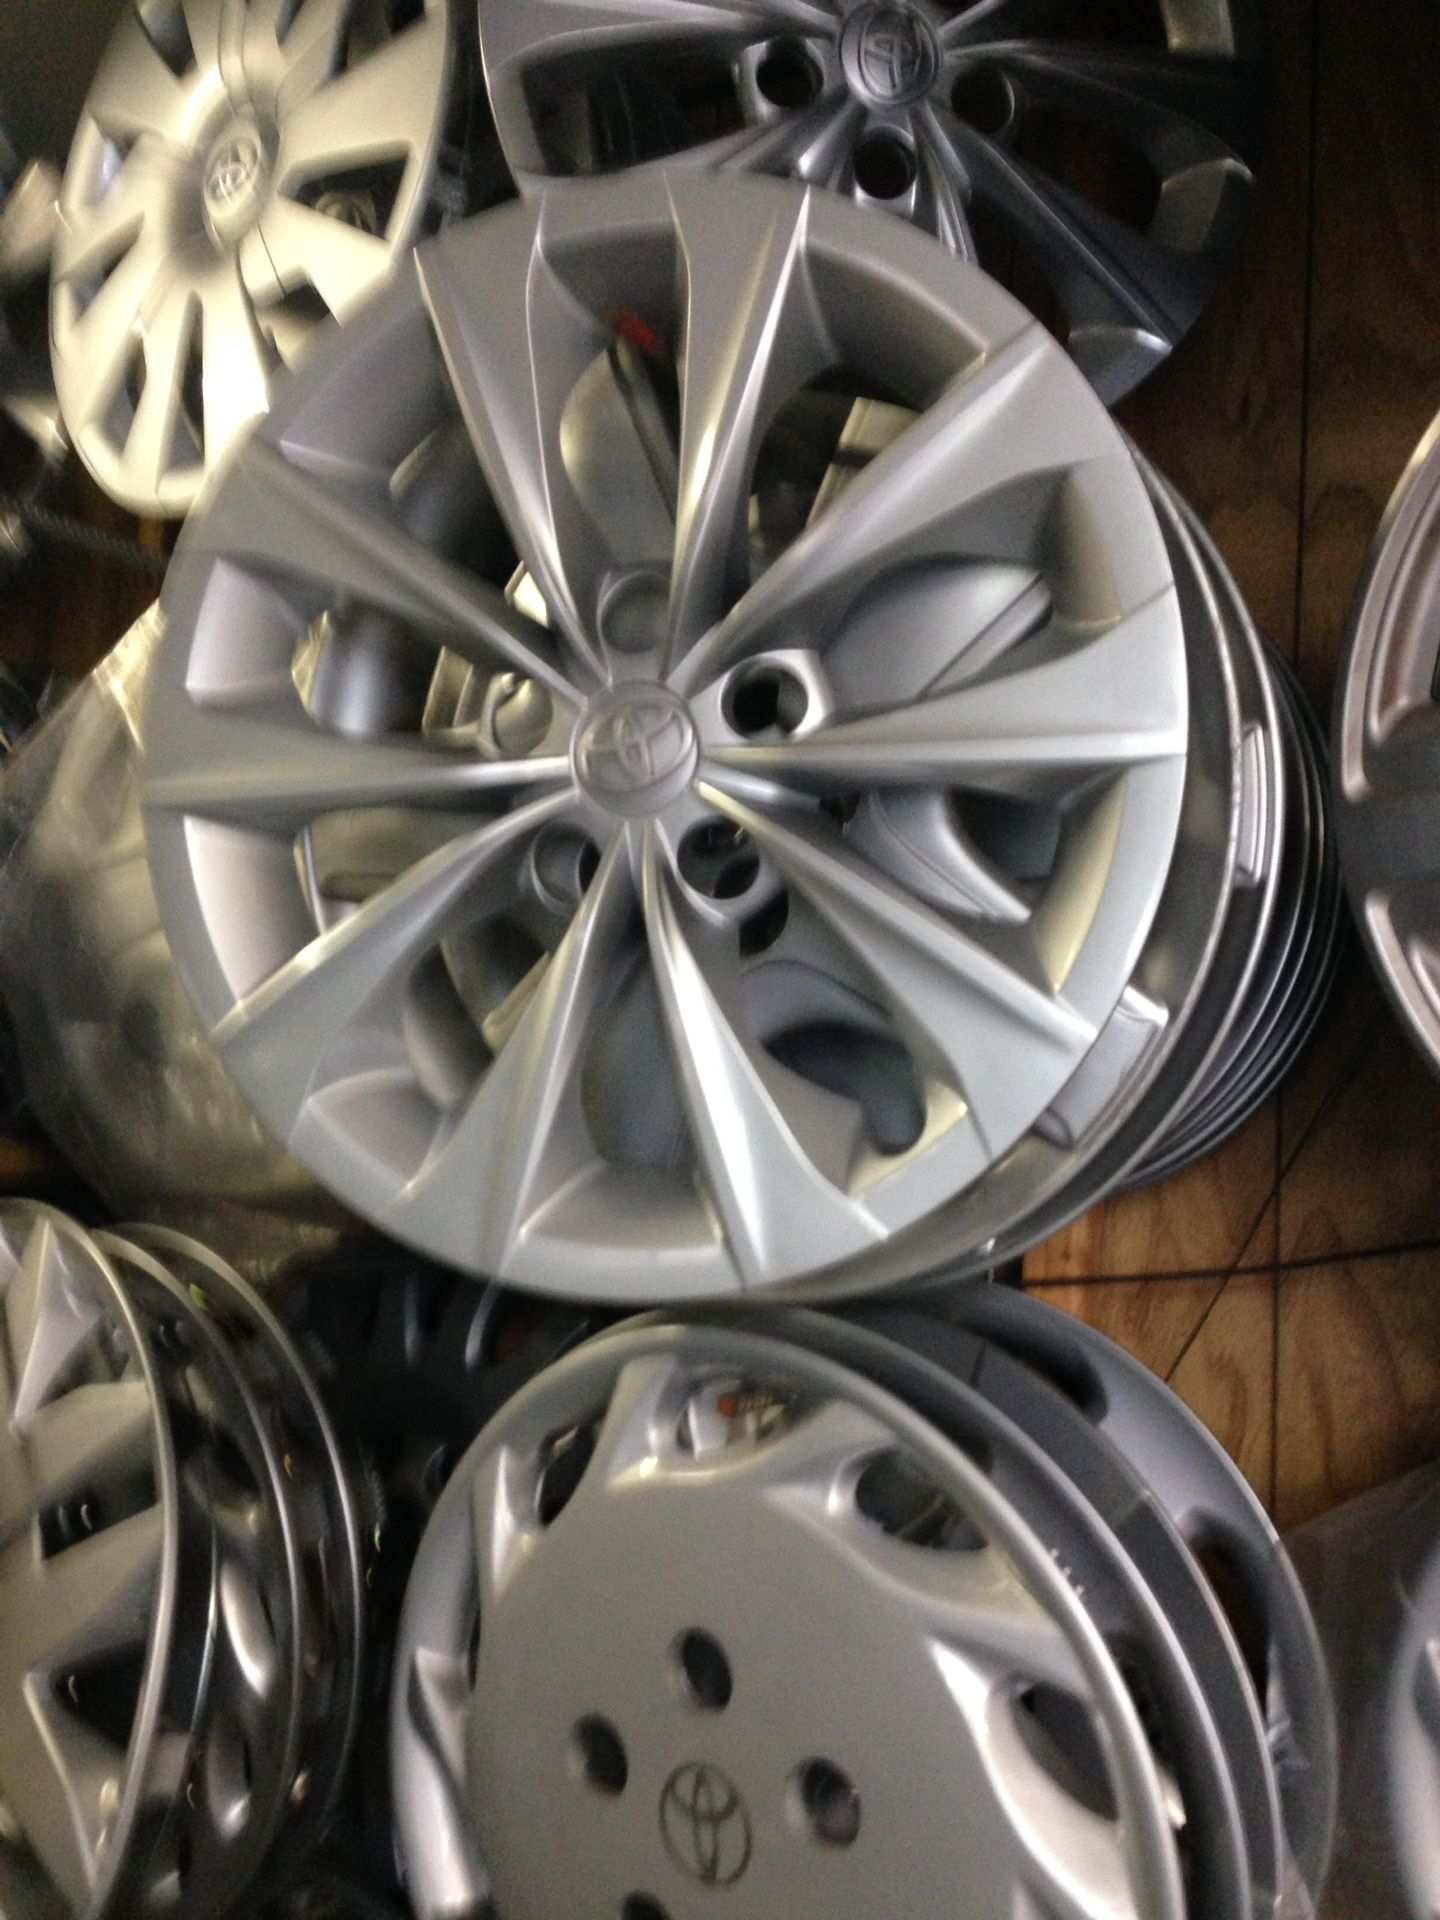 5,000 Toyota hubcaps in stock! Ask us today!